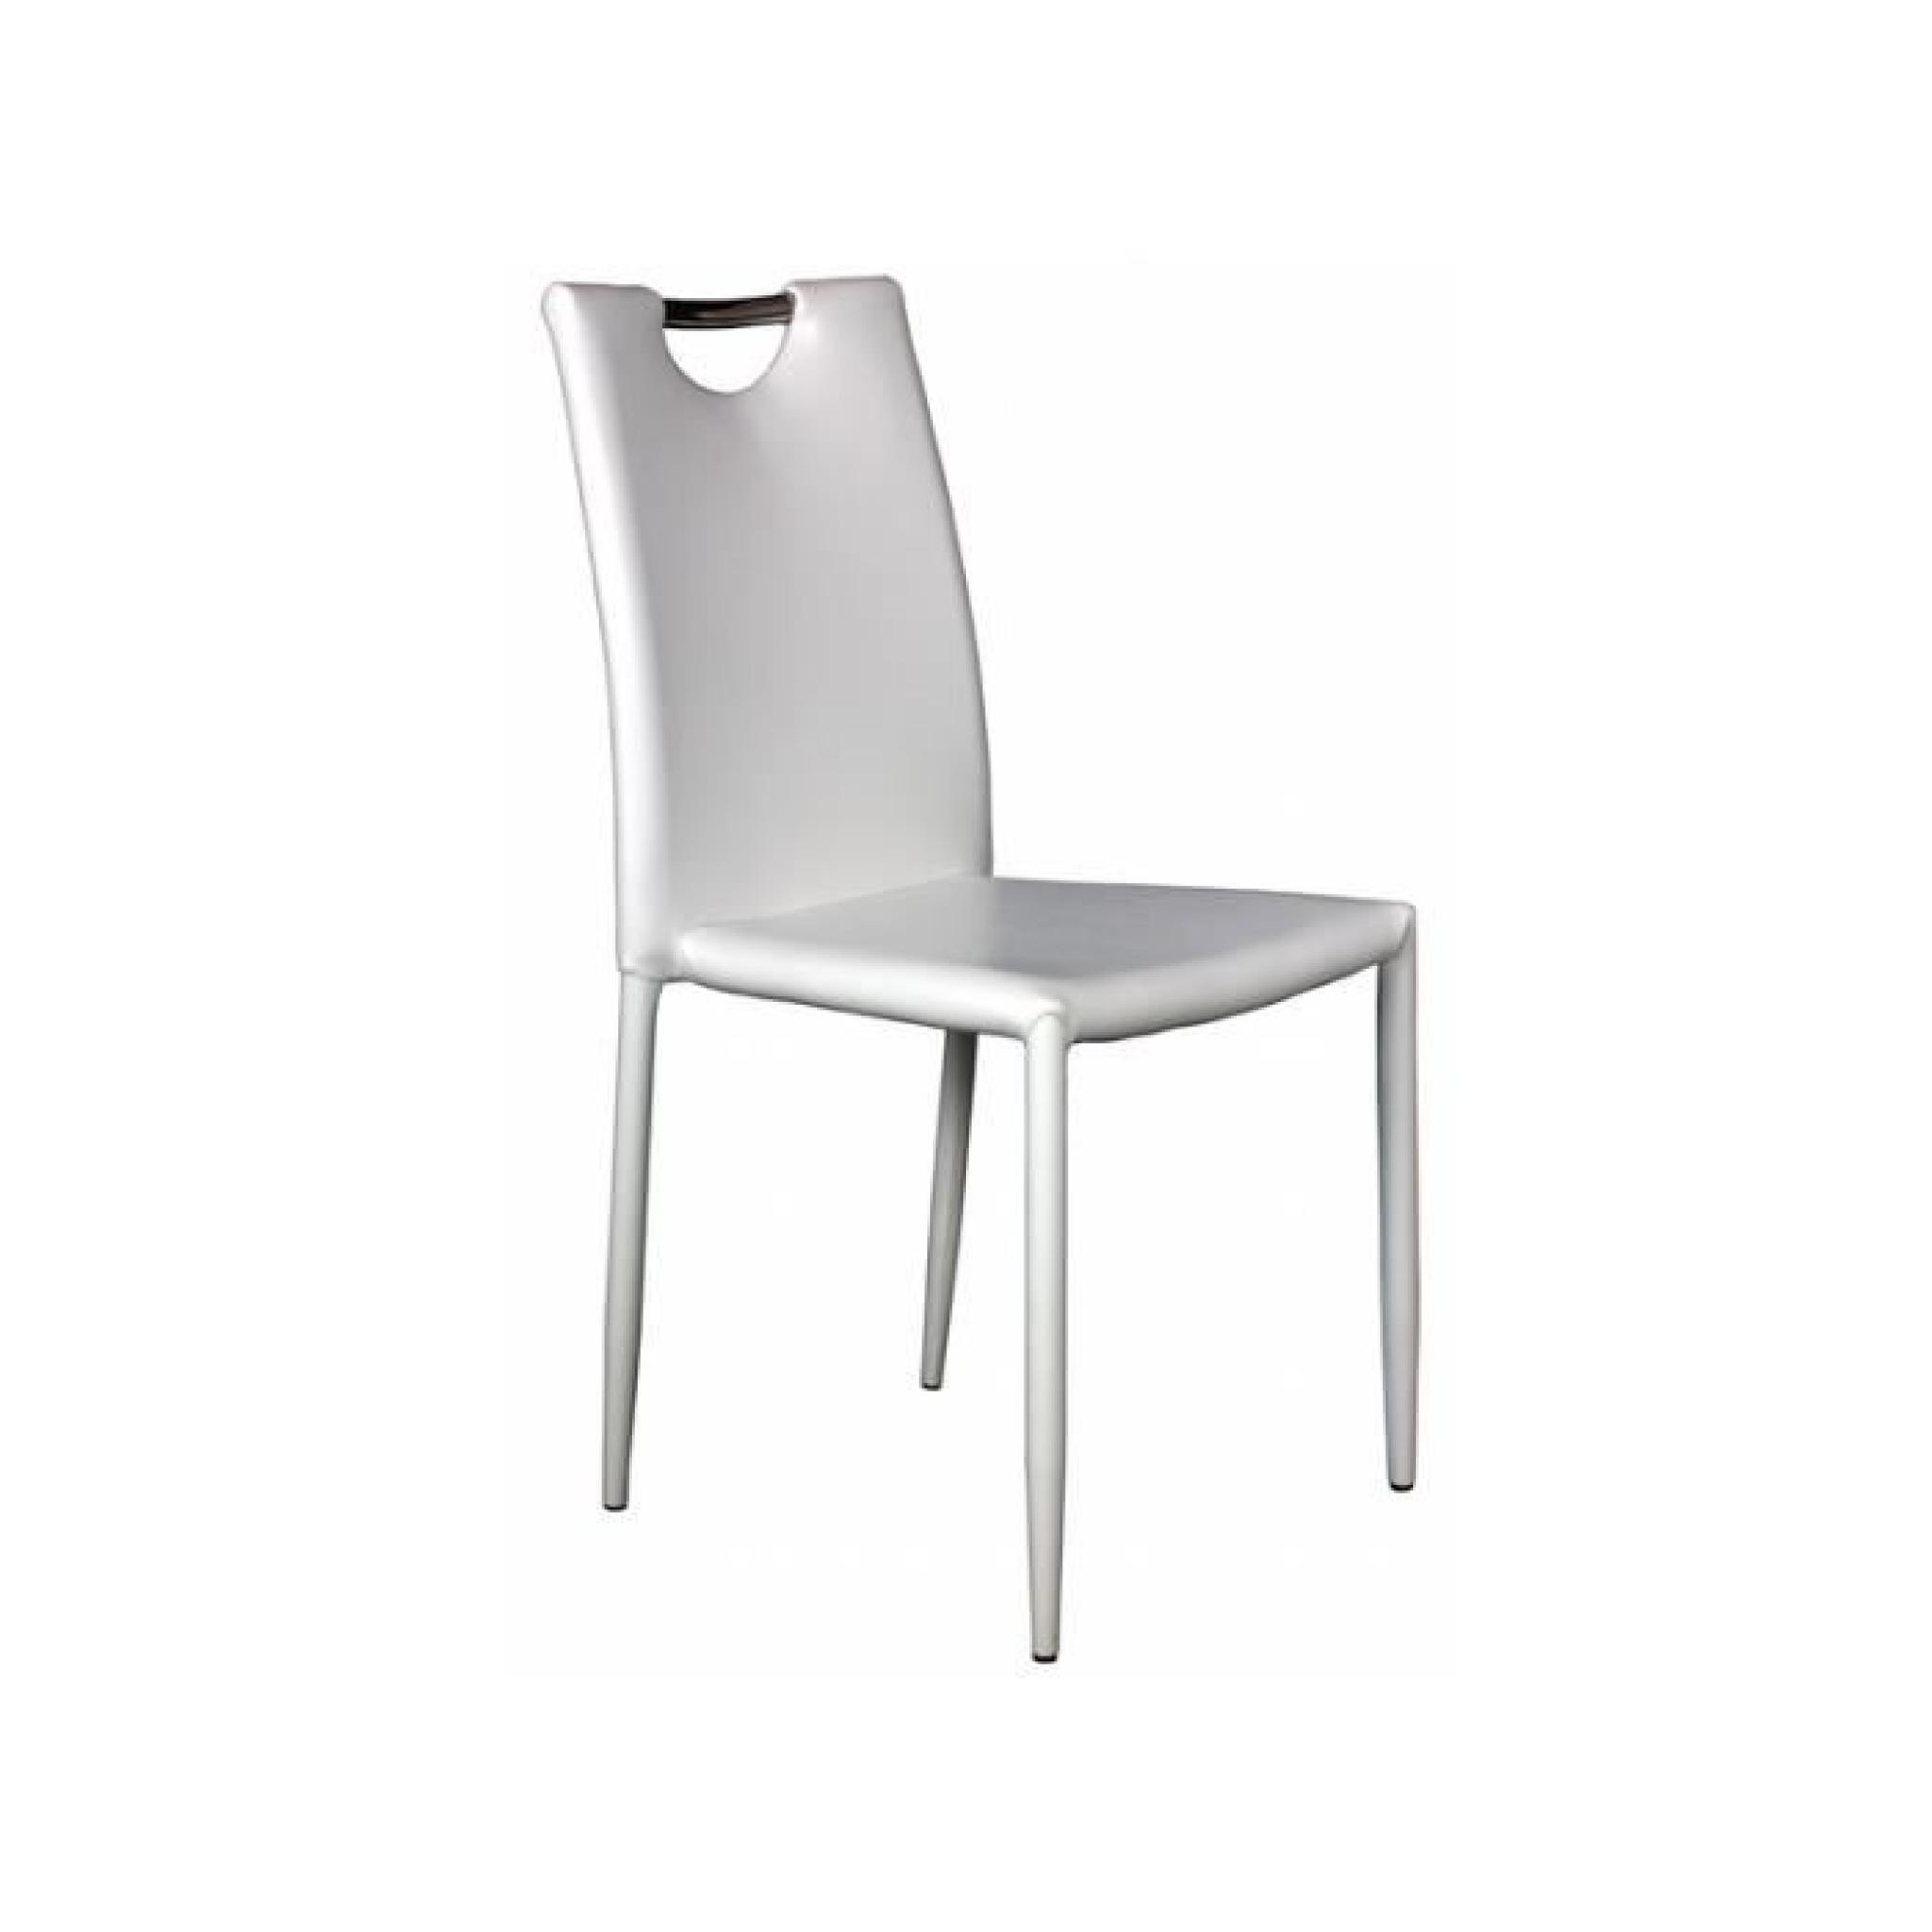 Kira - Lot 2 Chaises Blanches pas cher